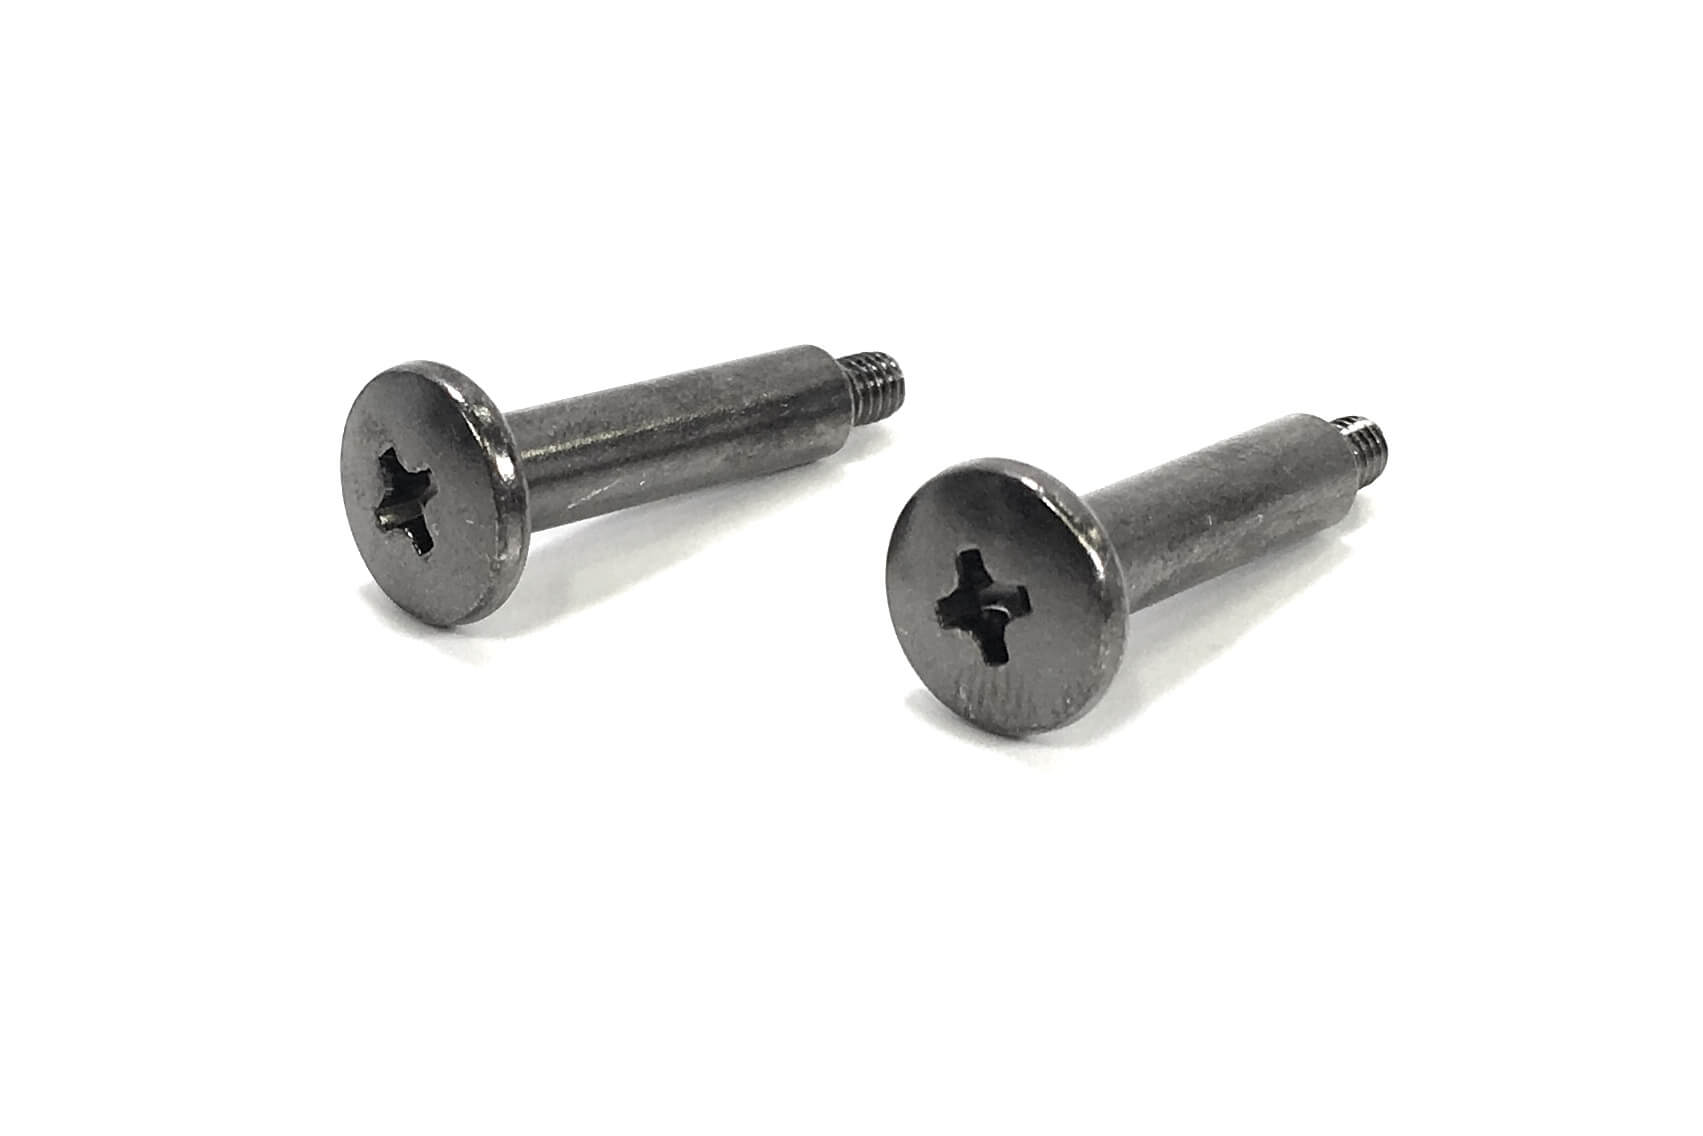 Original Microphone Holder screws that fit on the the Canon XA25 camcorder. It is a genuine Canon part, sourced directly from Canon USA. Brand new factory fresh. Free Shipping.